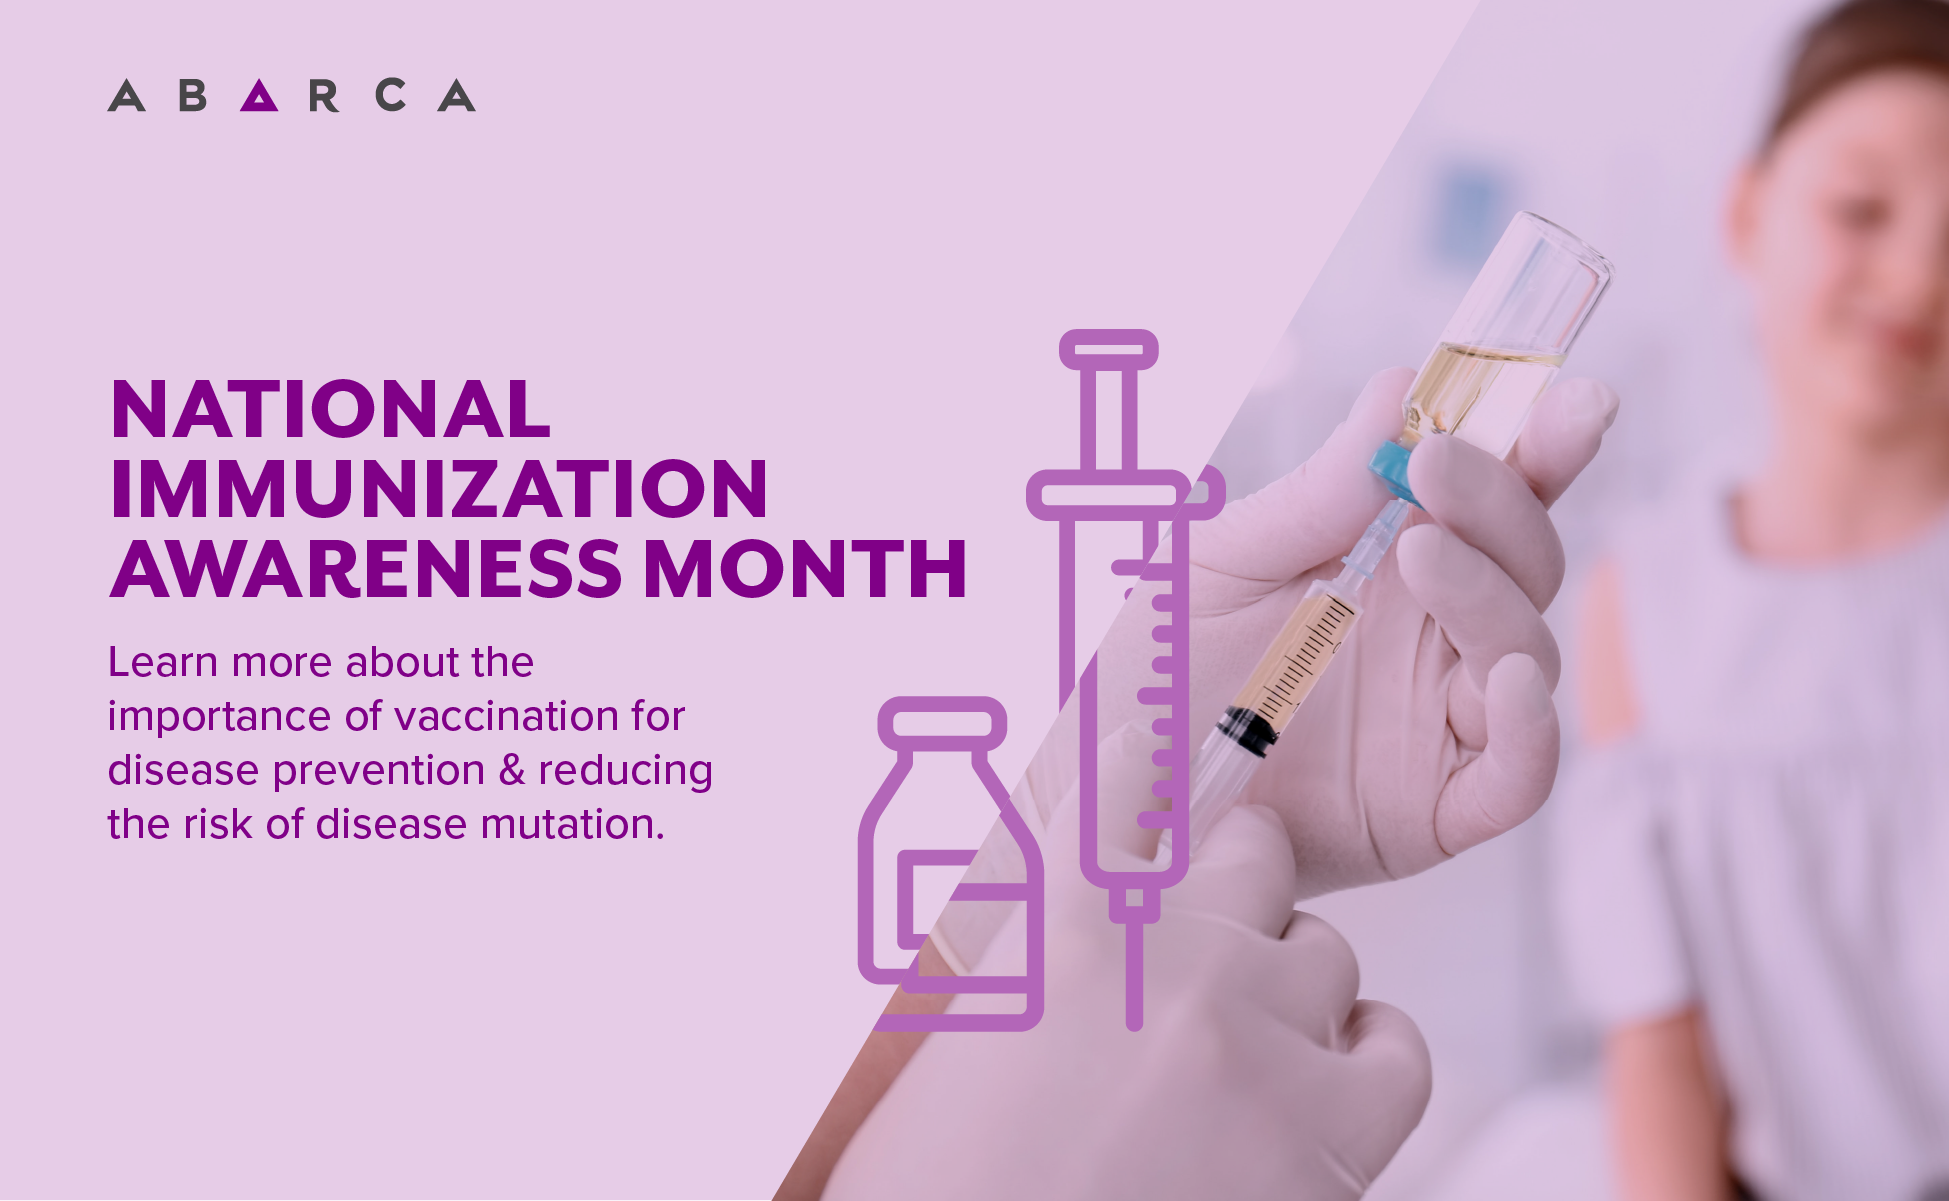 Abarca: National Immunization Awareness Month: The Importance of Vaccination for Disease Prevention